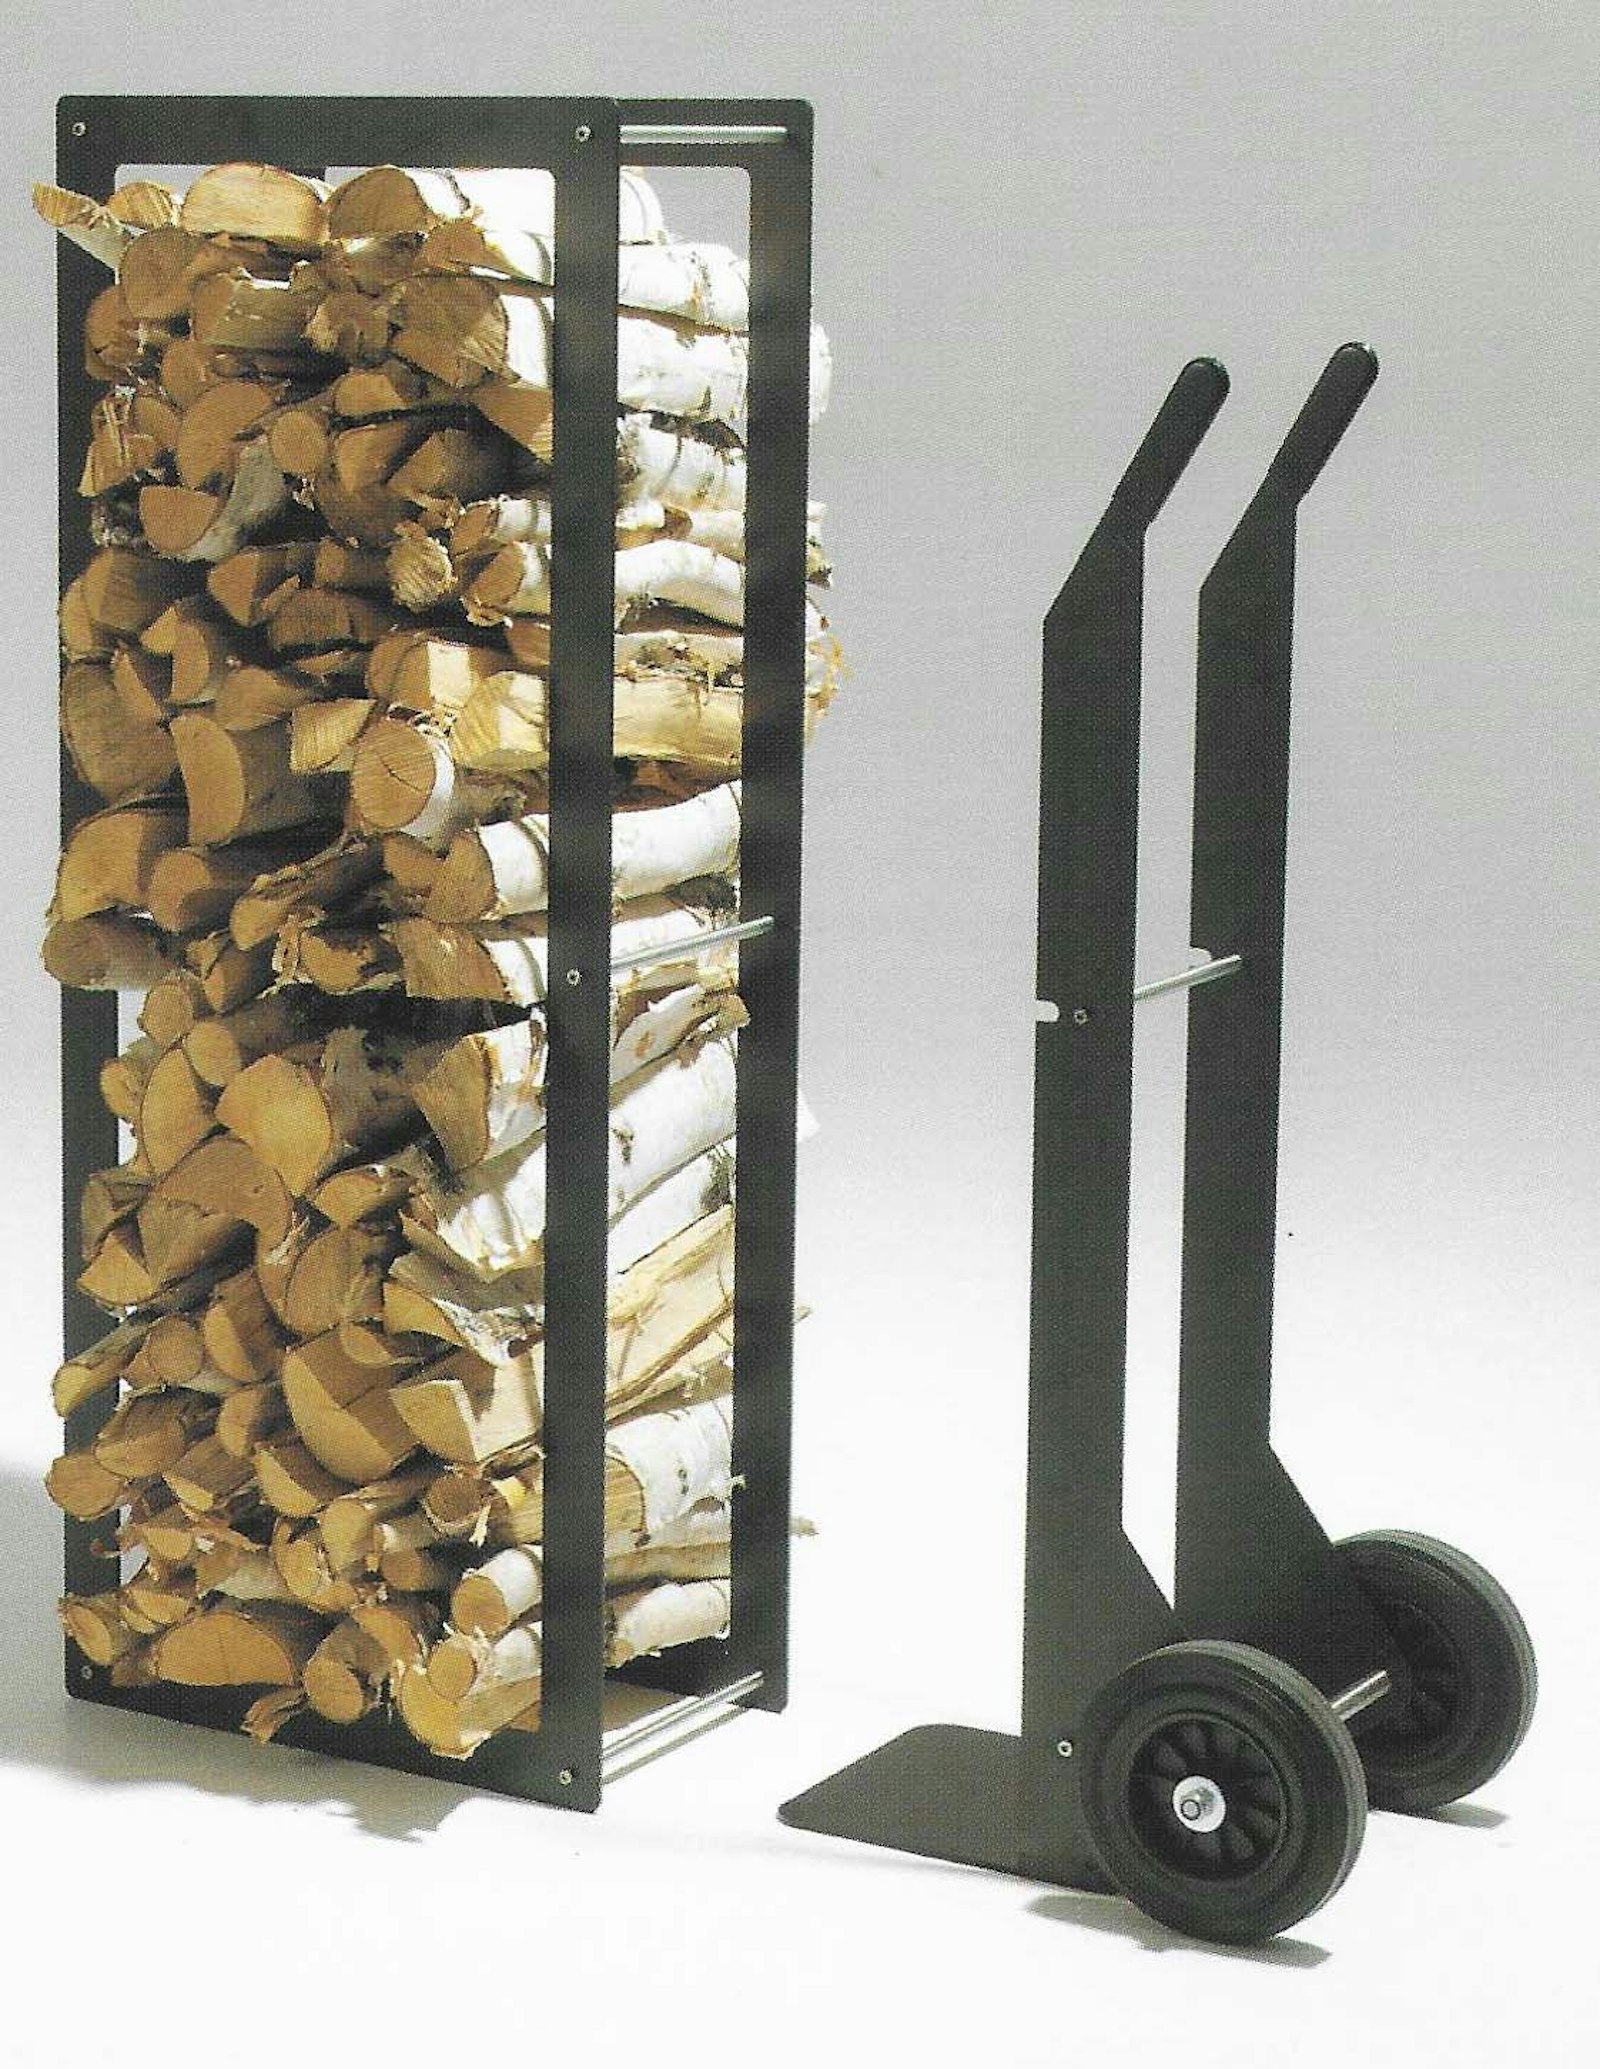 'Woodstock', log cart and rack, Dirk Wynants, for Extremis